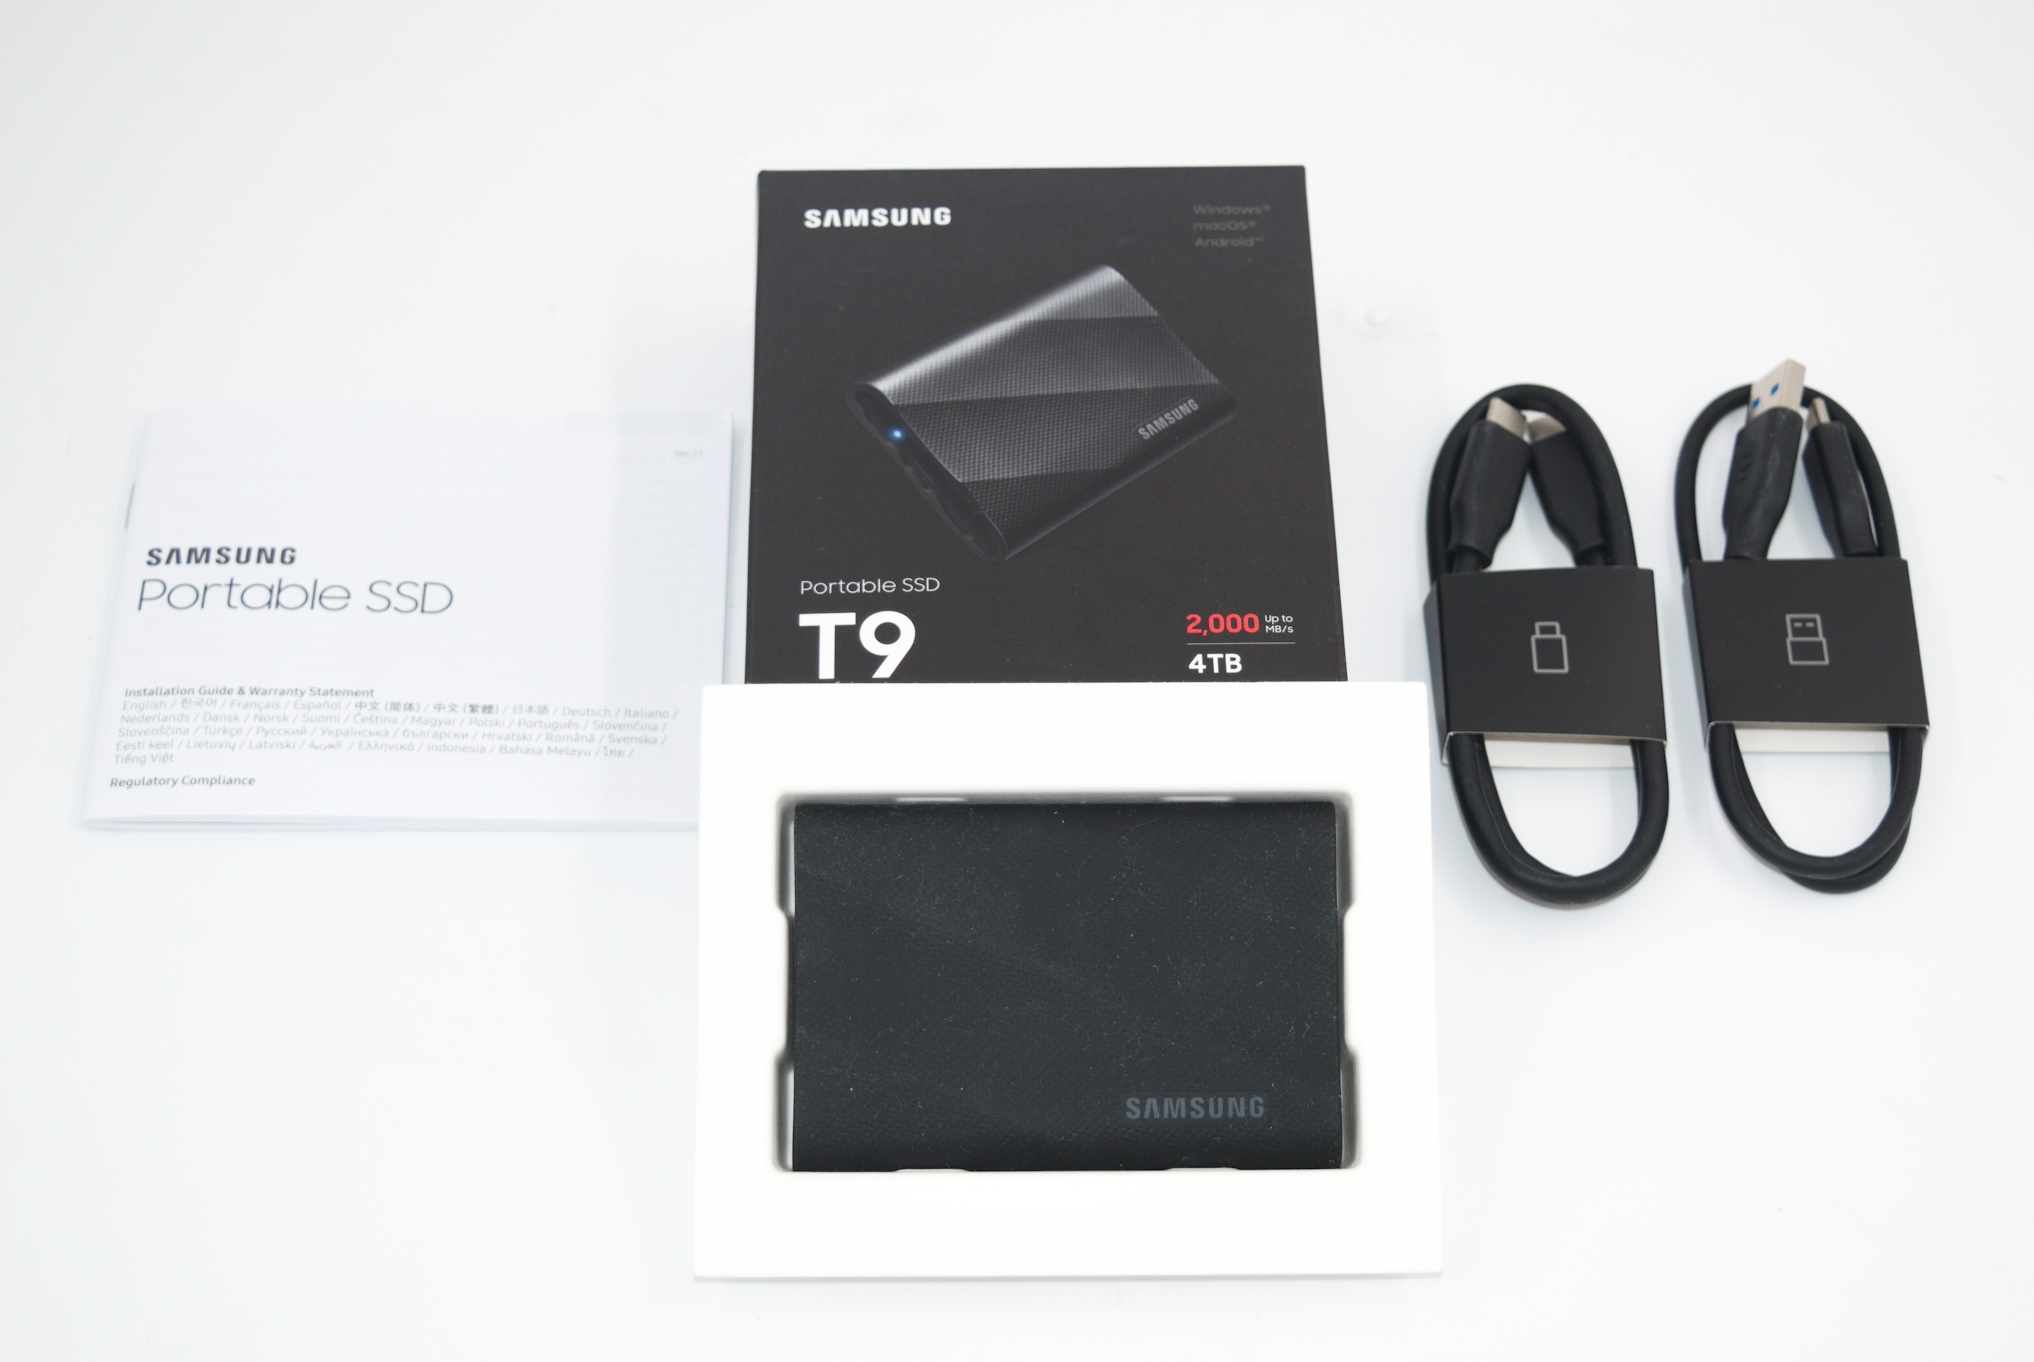 Samsung Portable SSD T9, Page 2